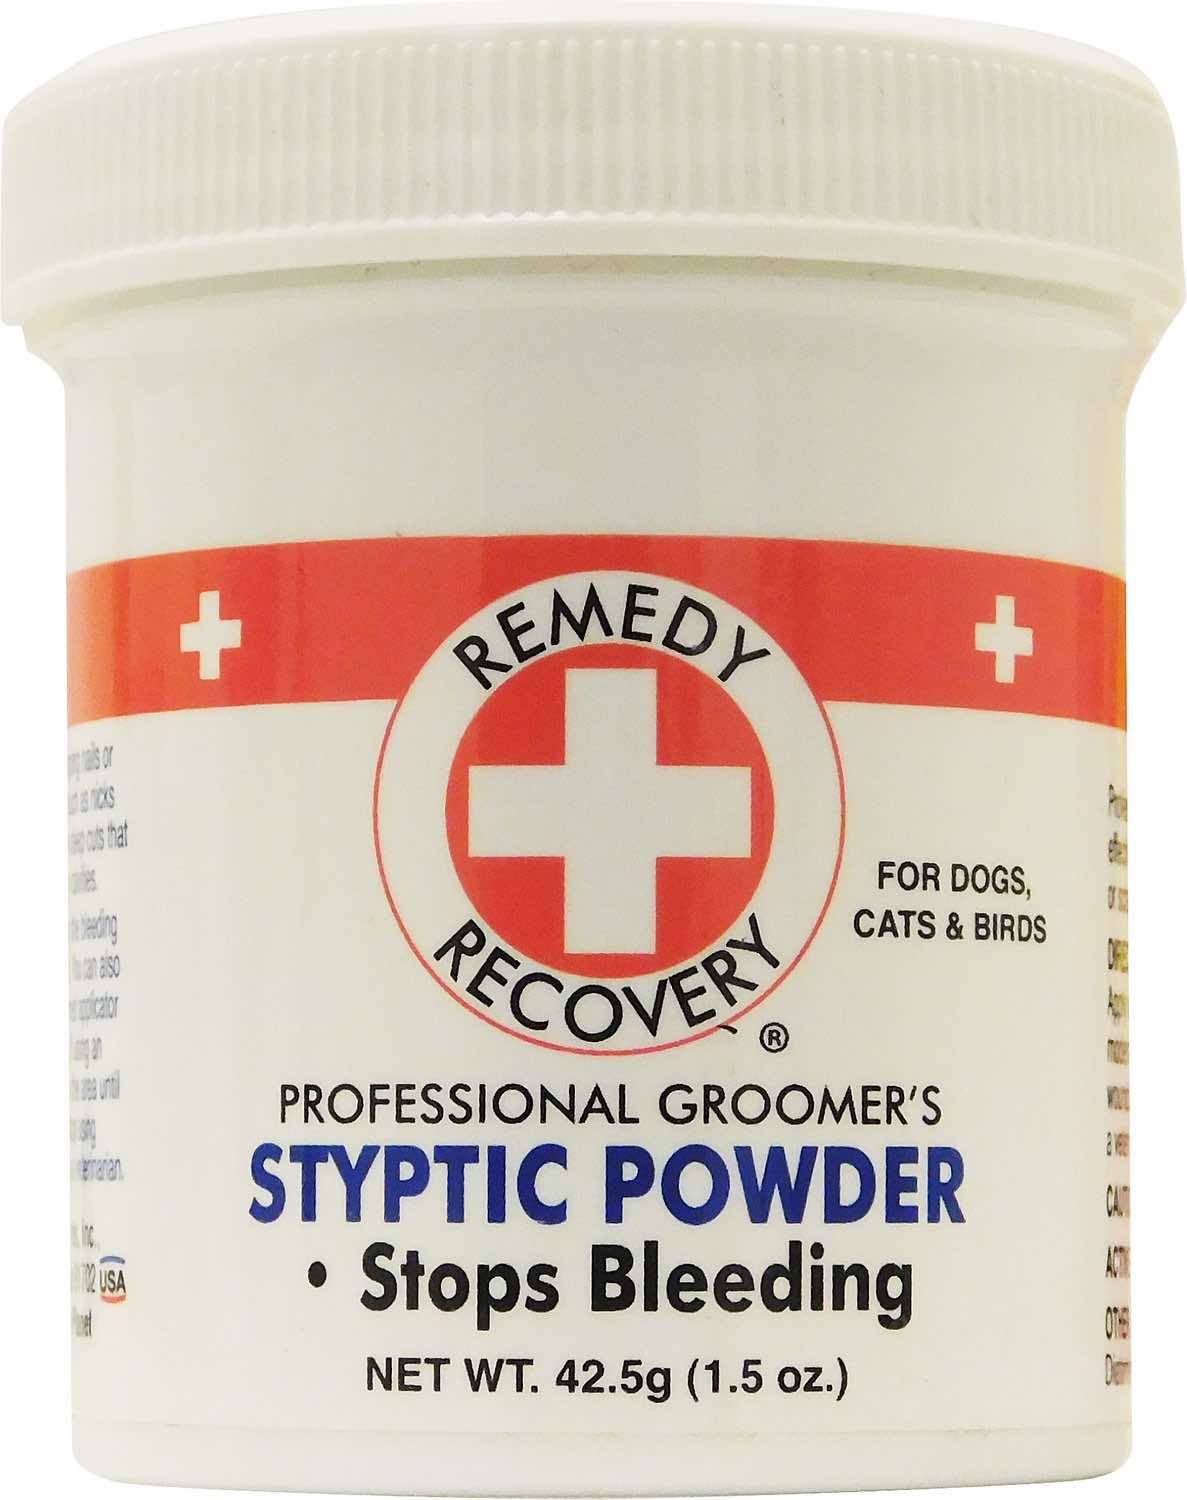 Remedy+Recovery Professional Groomer's Styptic Powder 1.5 oz 1